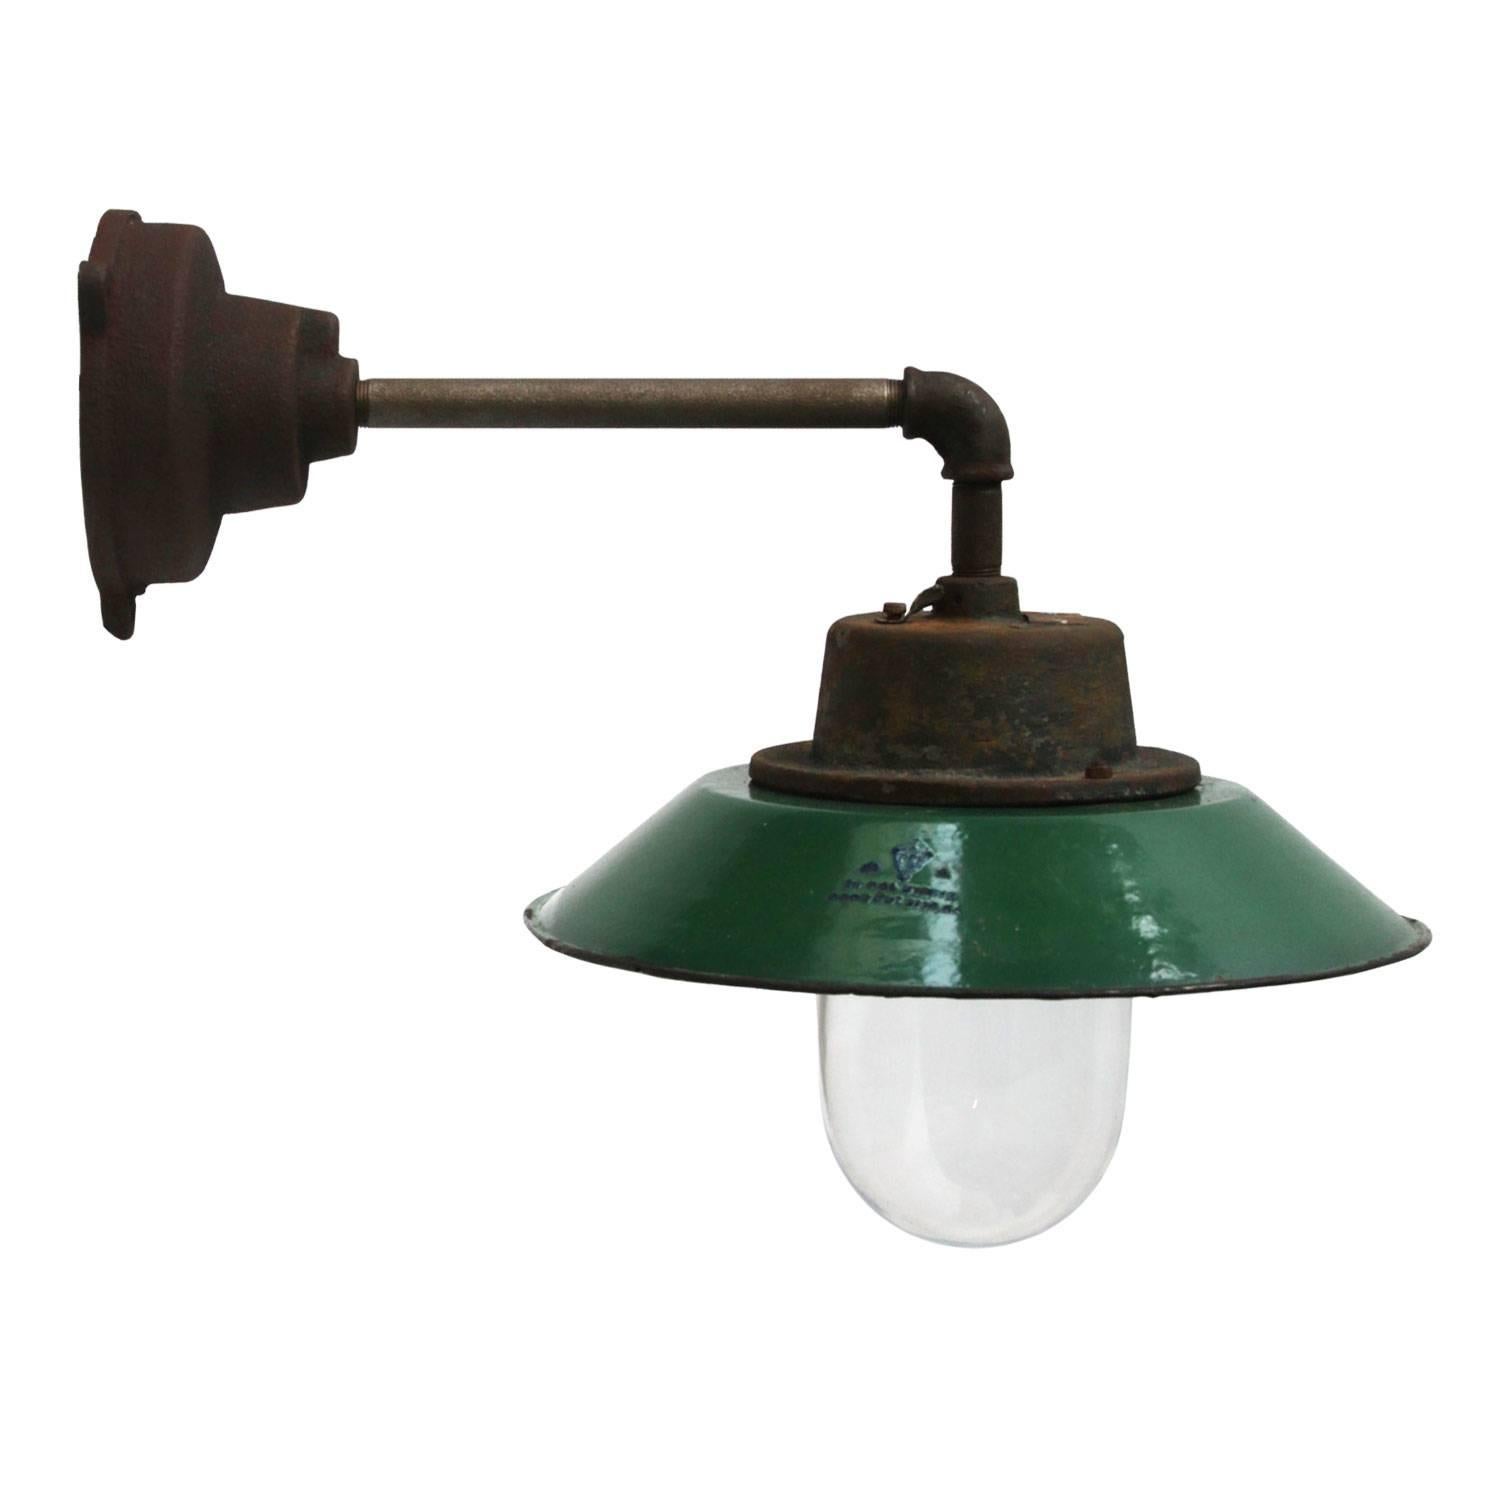 Green Enamel Vintage Industrial Wall Lamp Cast Iron Arm Clear Glass